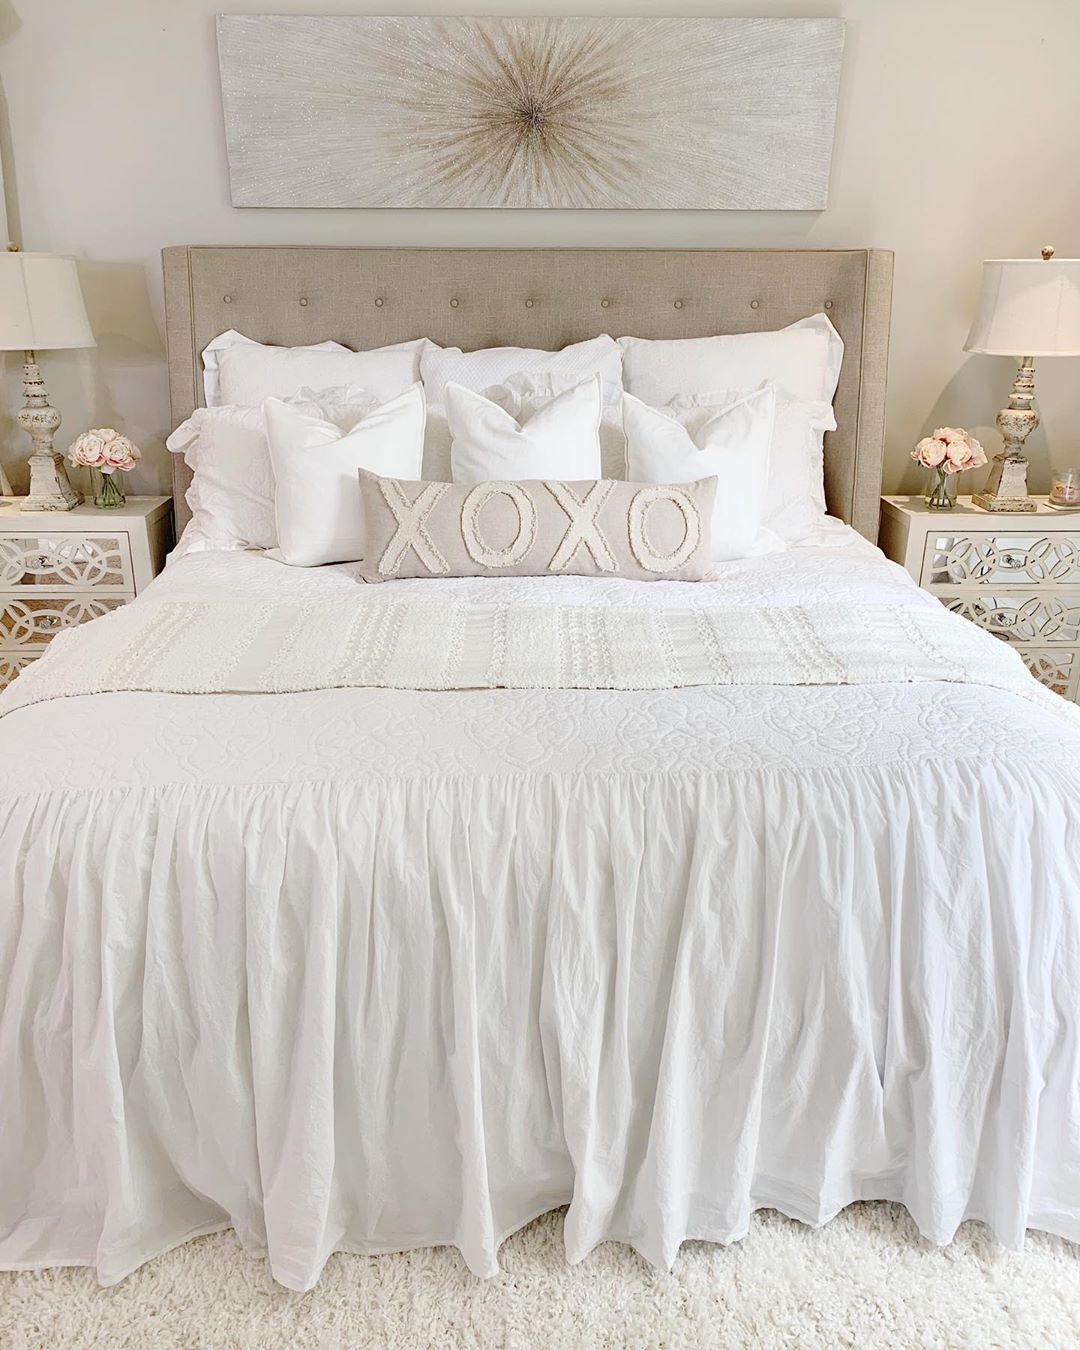 White bed with tan pillows.